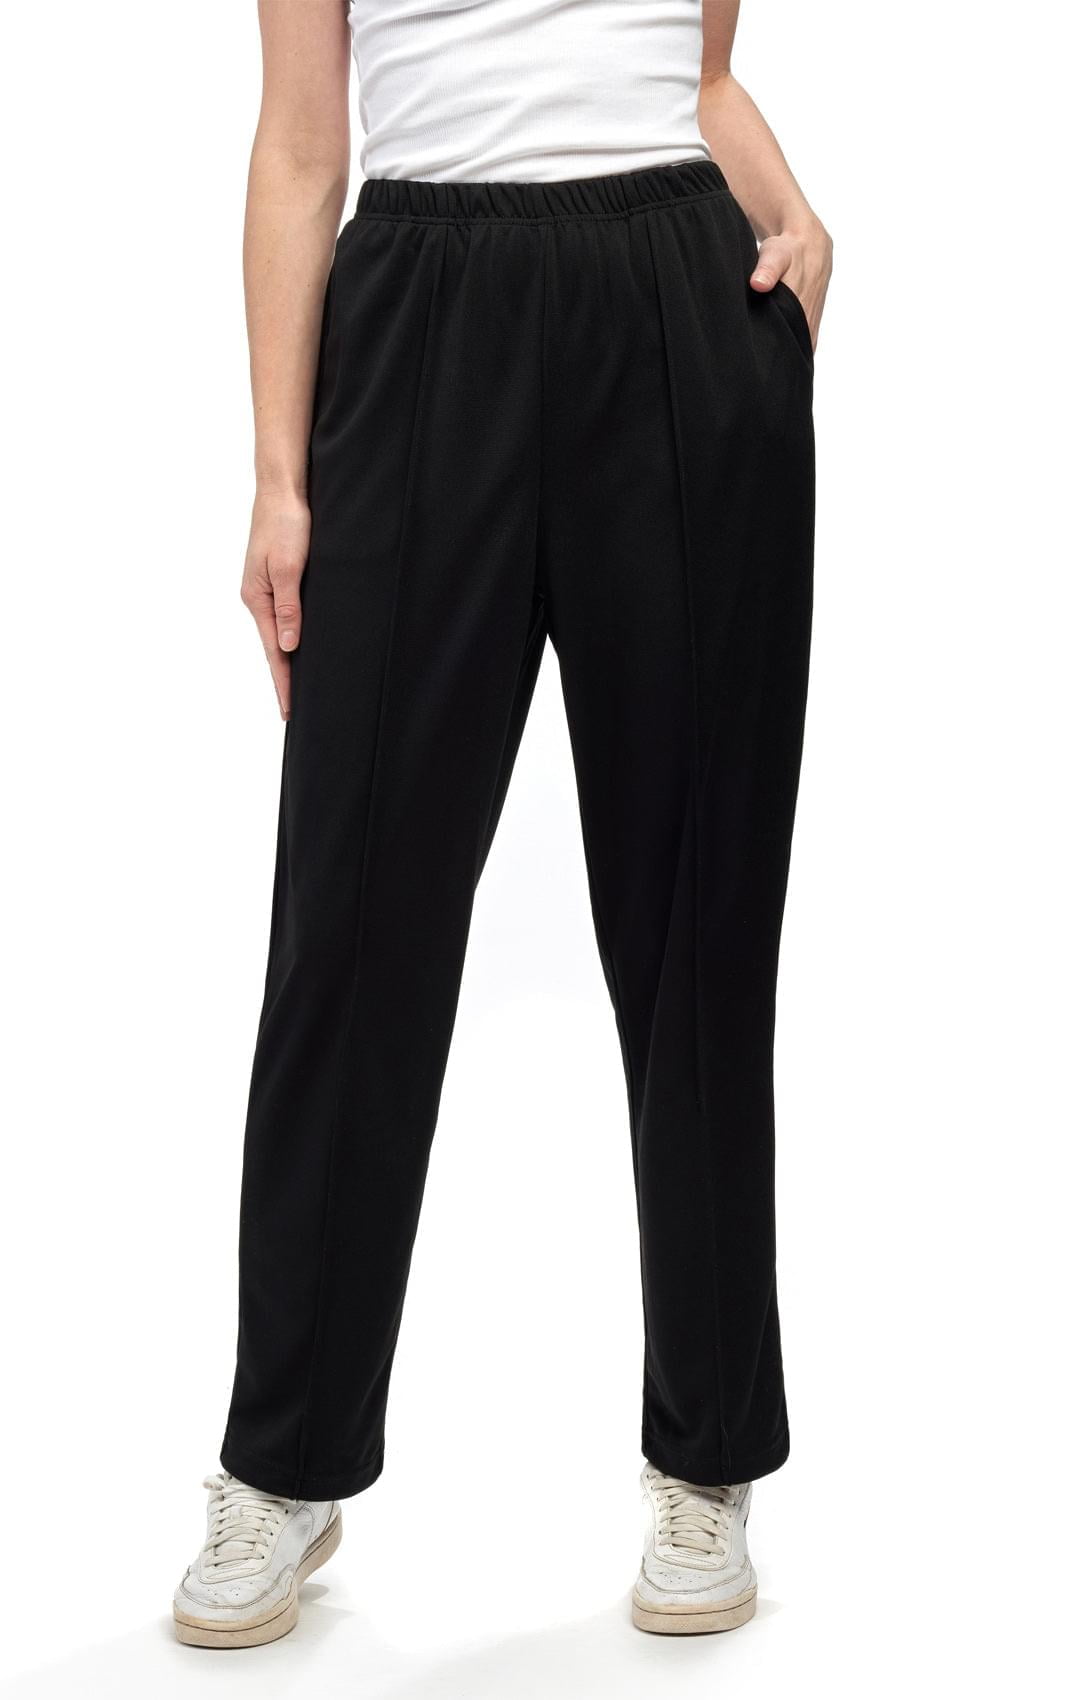 Women's Classic Poly Knit Pants - Pull On Slacks with Elastic Waist for ...